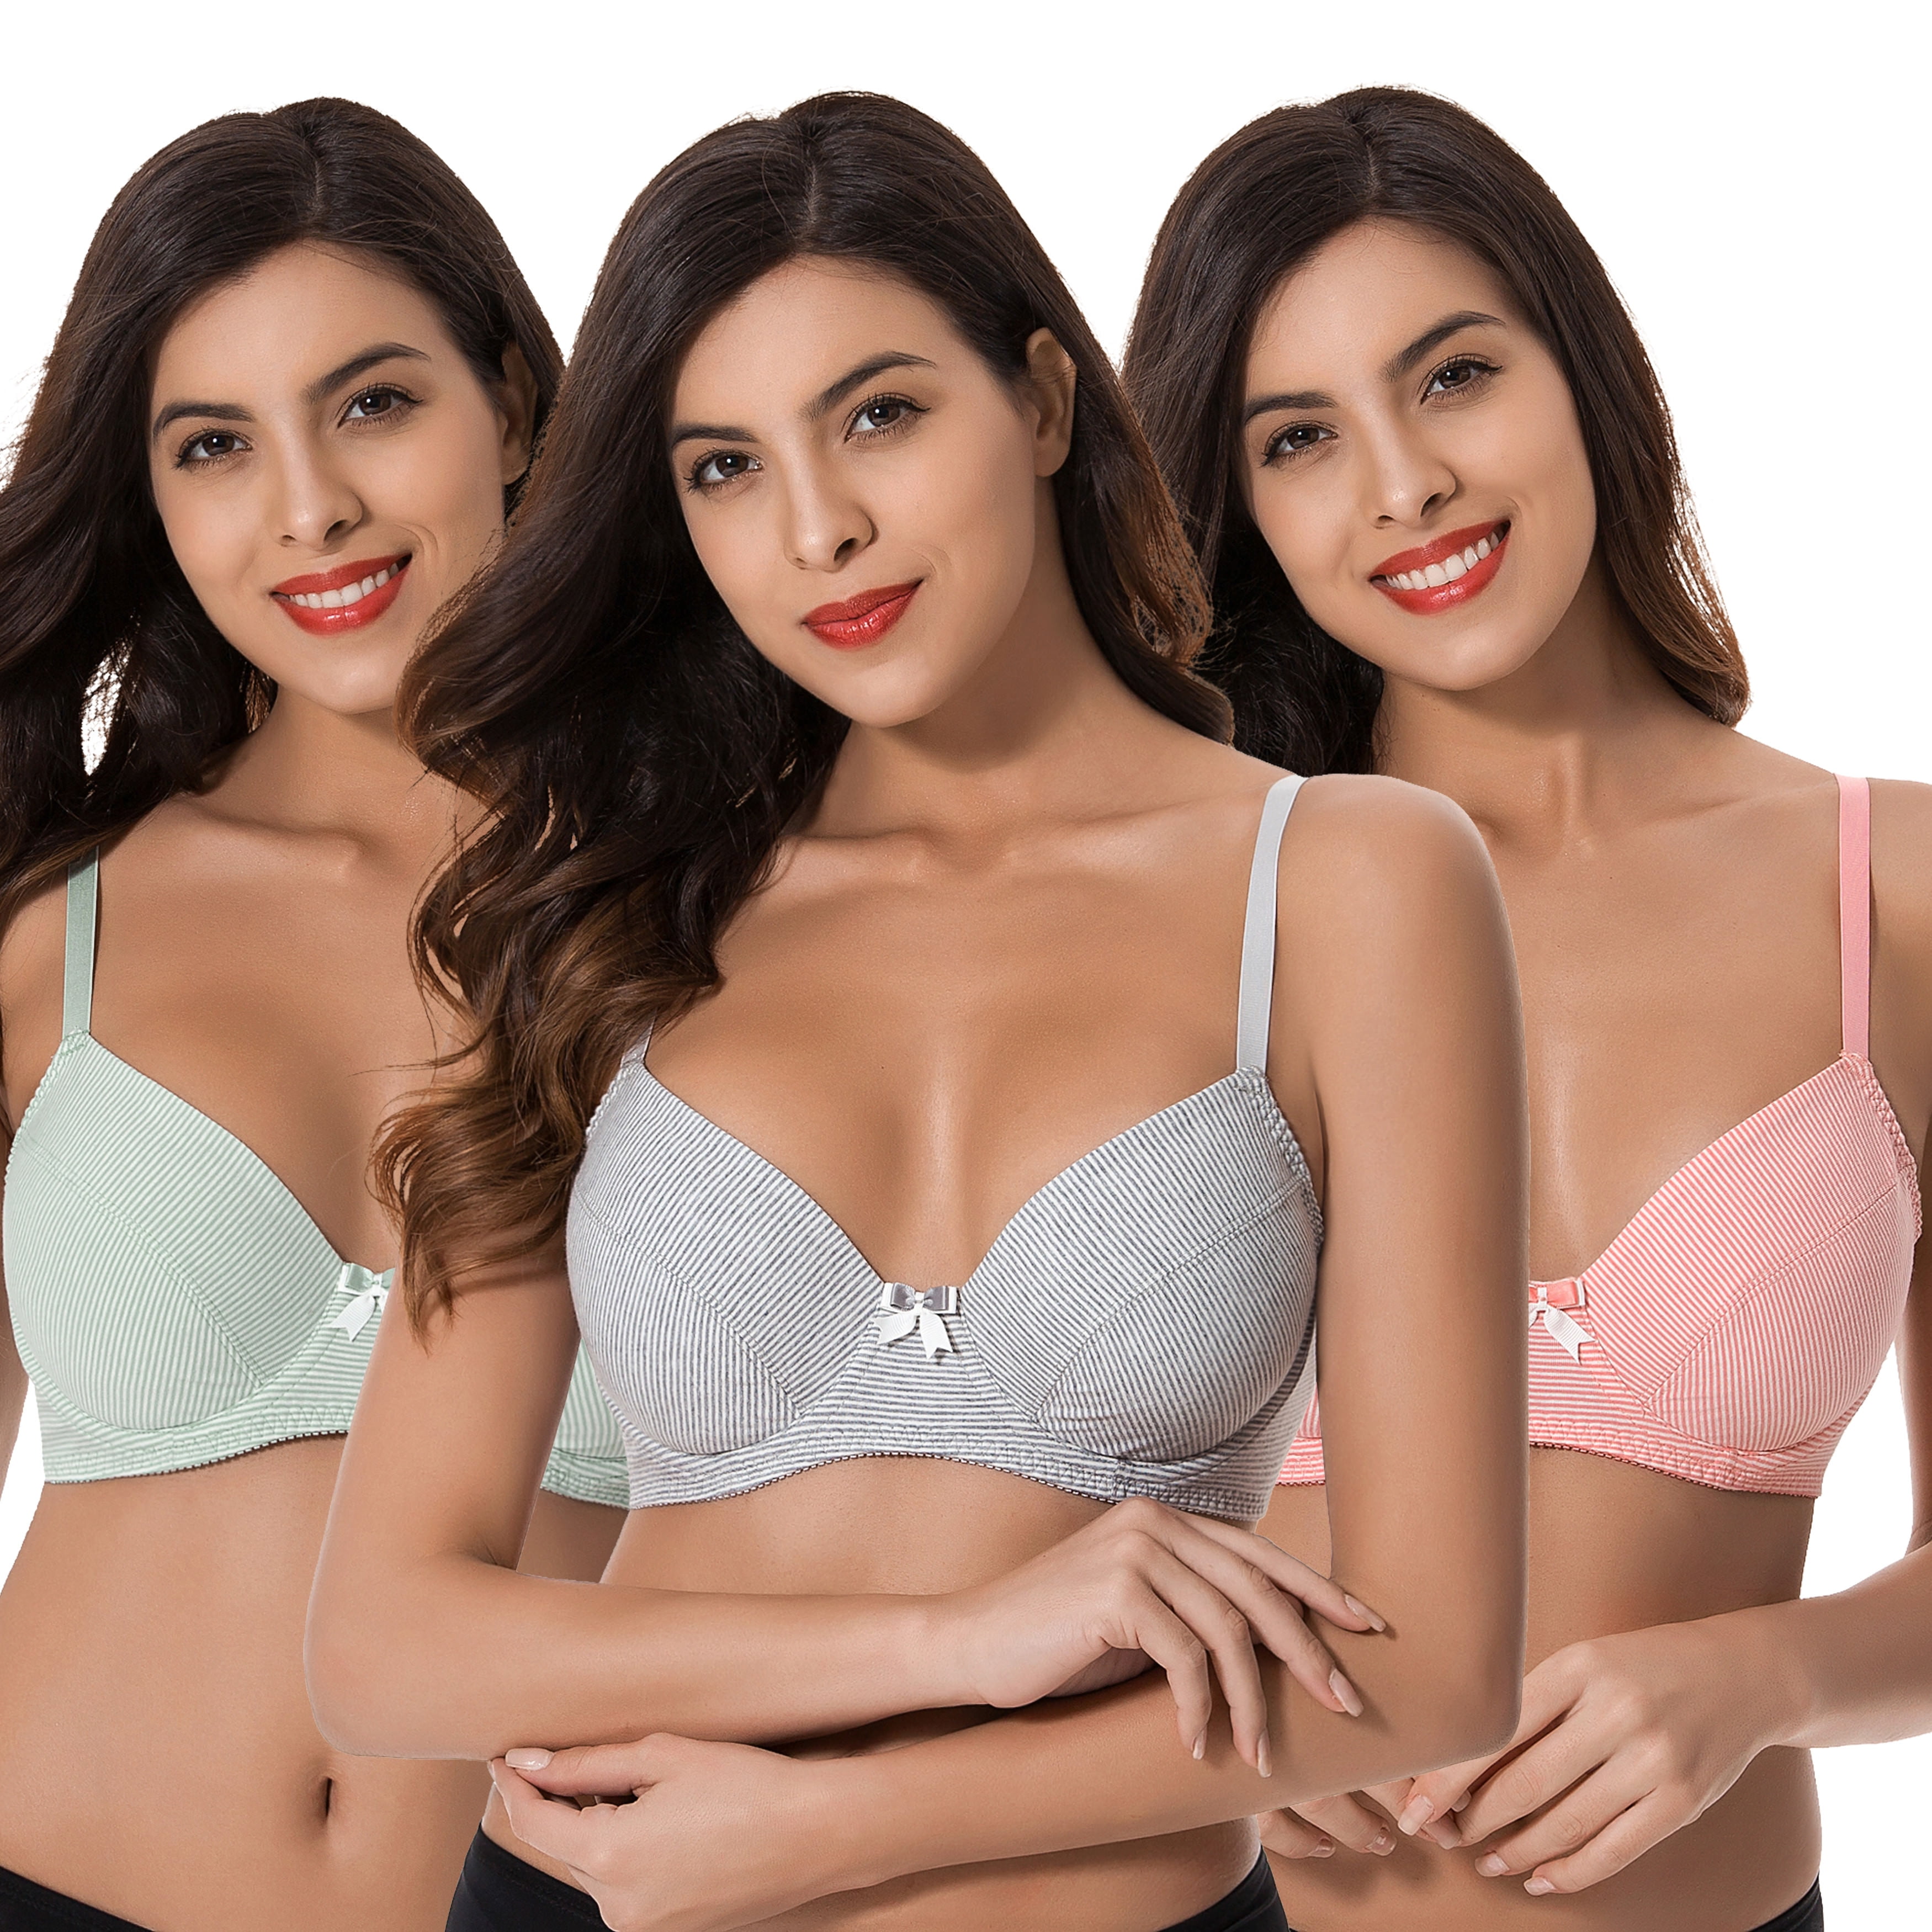 Curve Muse Womens Plus Size Underwired Unlined Balconette Cotton Bra-3Pack 